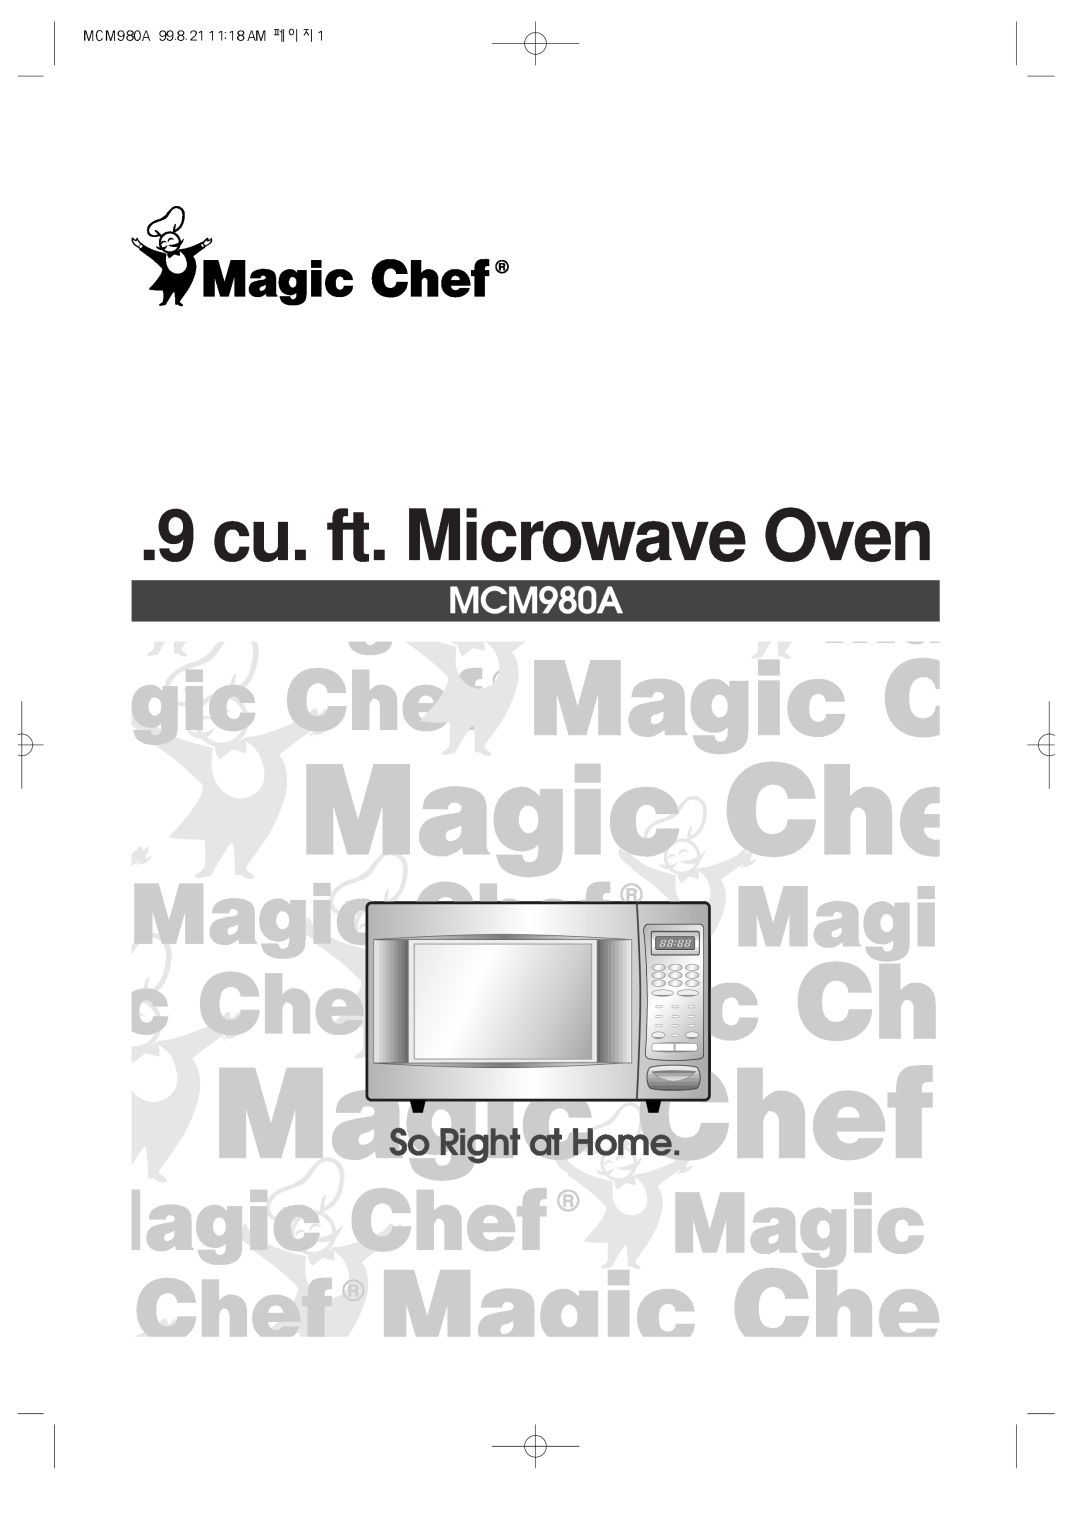 Daewoo MCM980A manual 9 cu. ft. Microwave Oven, So Right at Home 